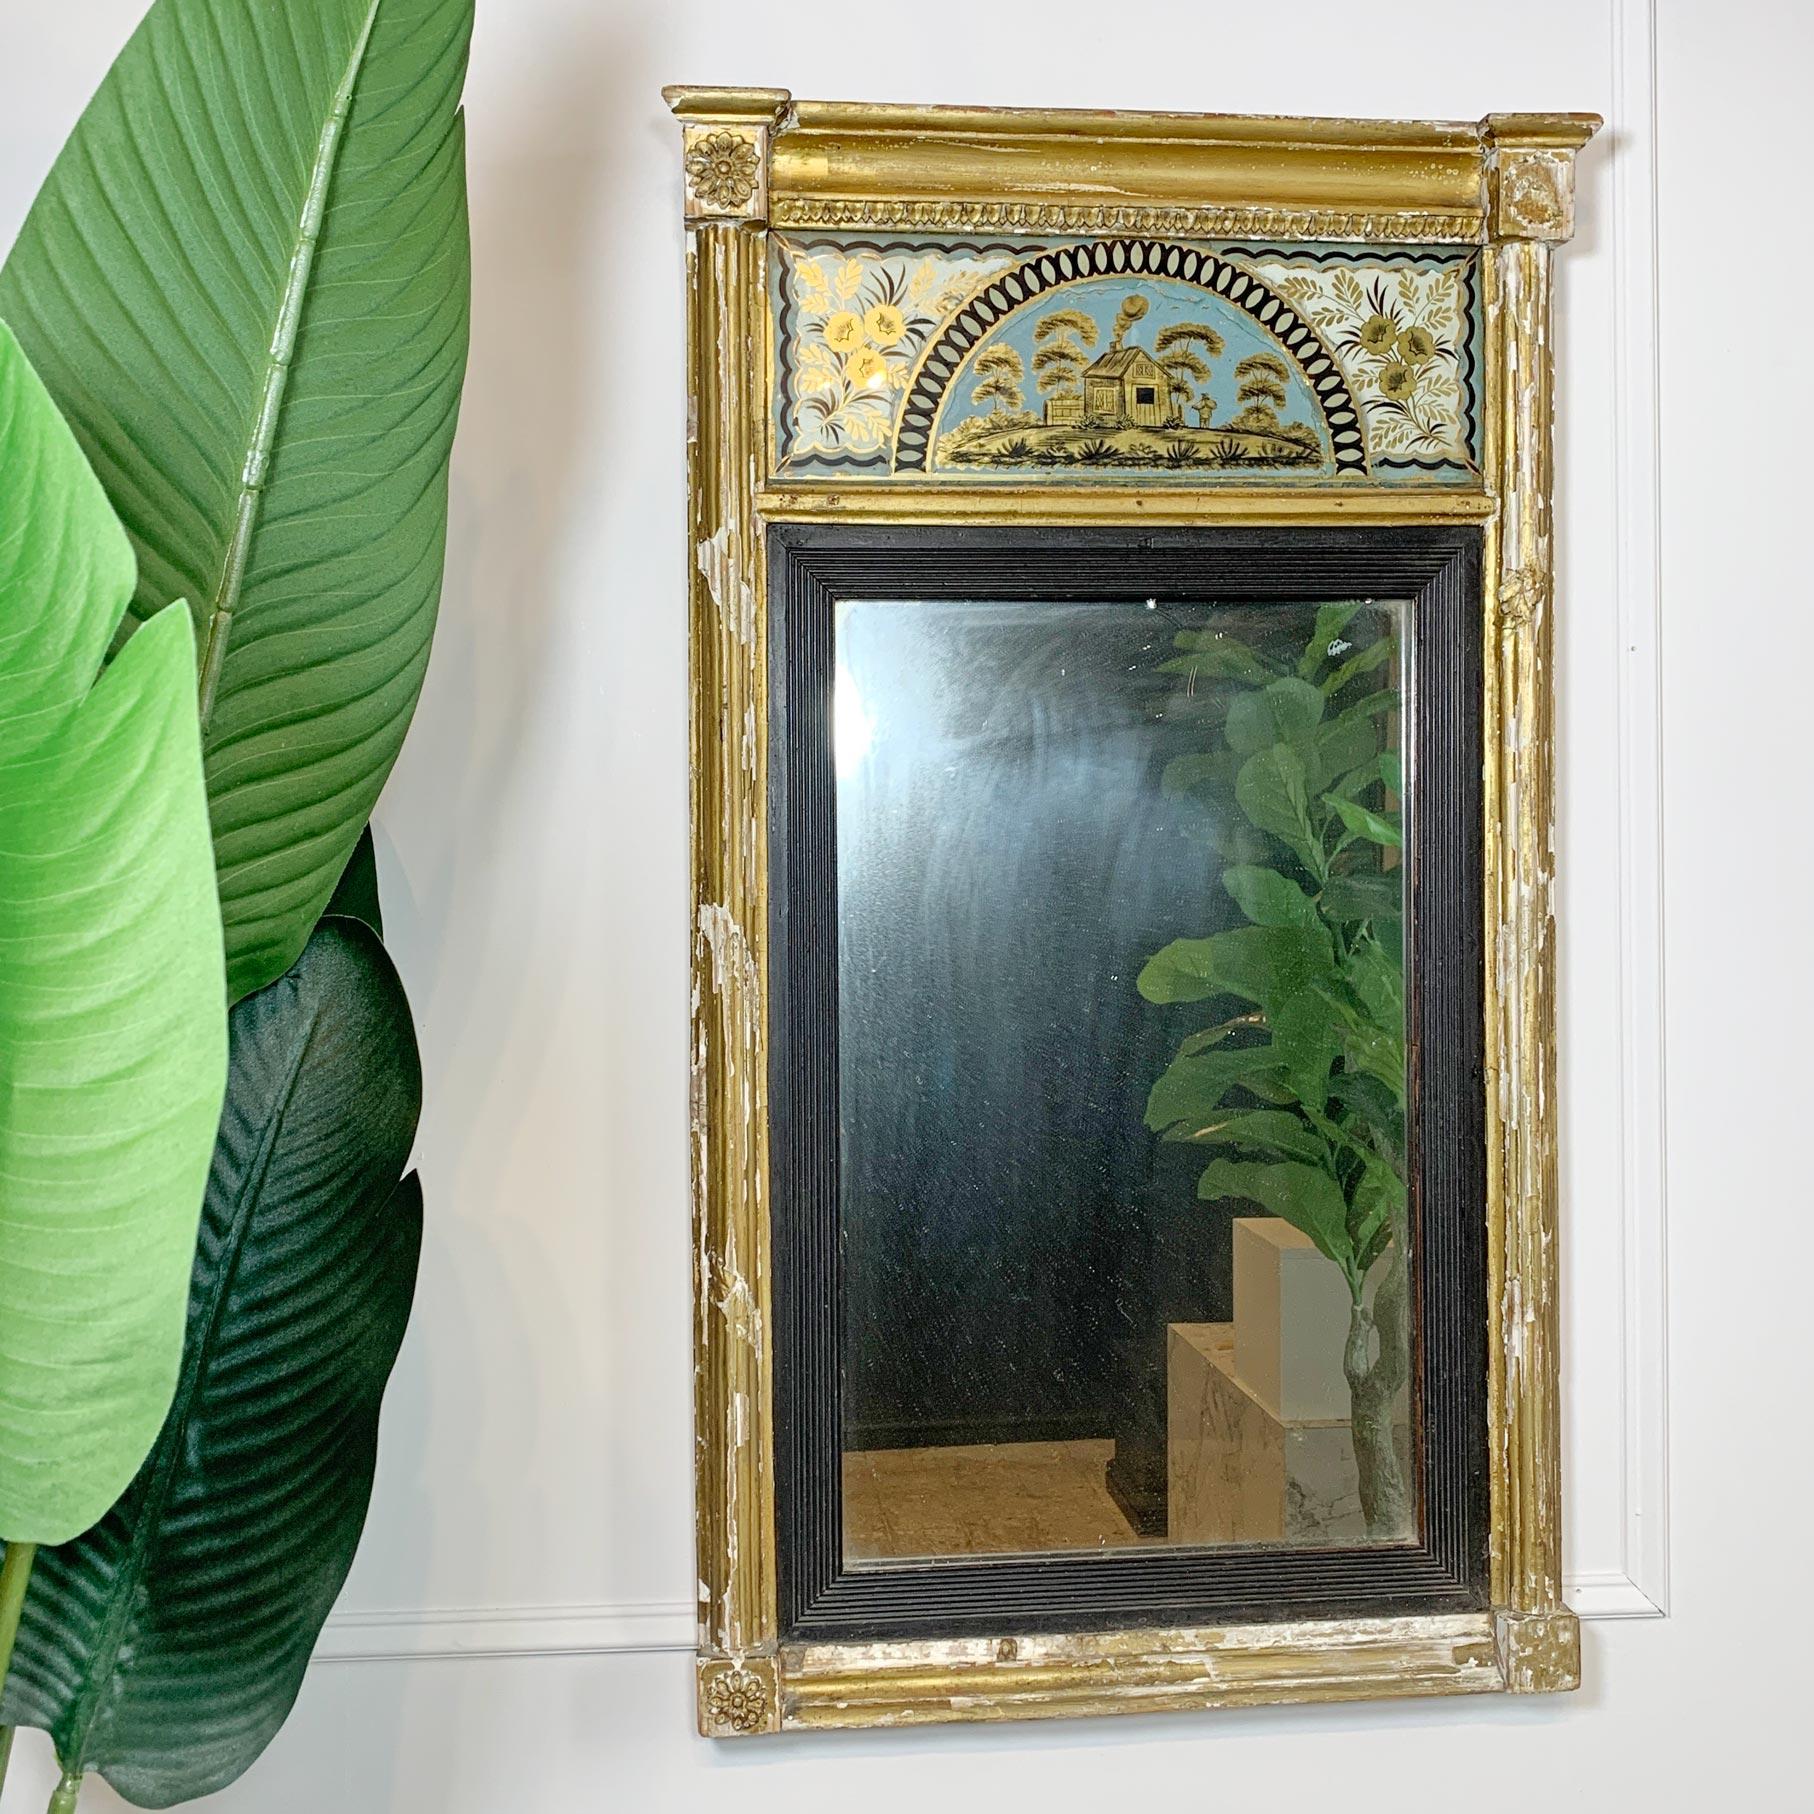 Achingly pretty Georgian period mirror, gilt-gesso surround with reeded insert around the original mercury plate. The verre eglomise frieze of a harvest scene, with gilded edging.

The plate and frieze are in superb condition, the frame is